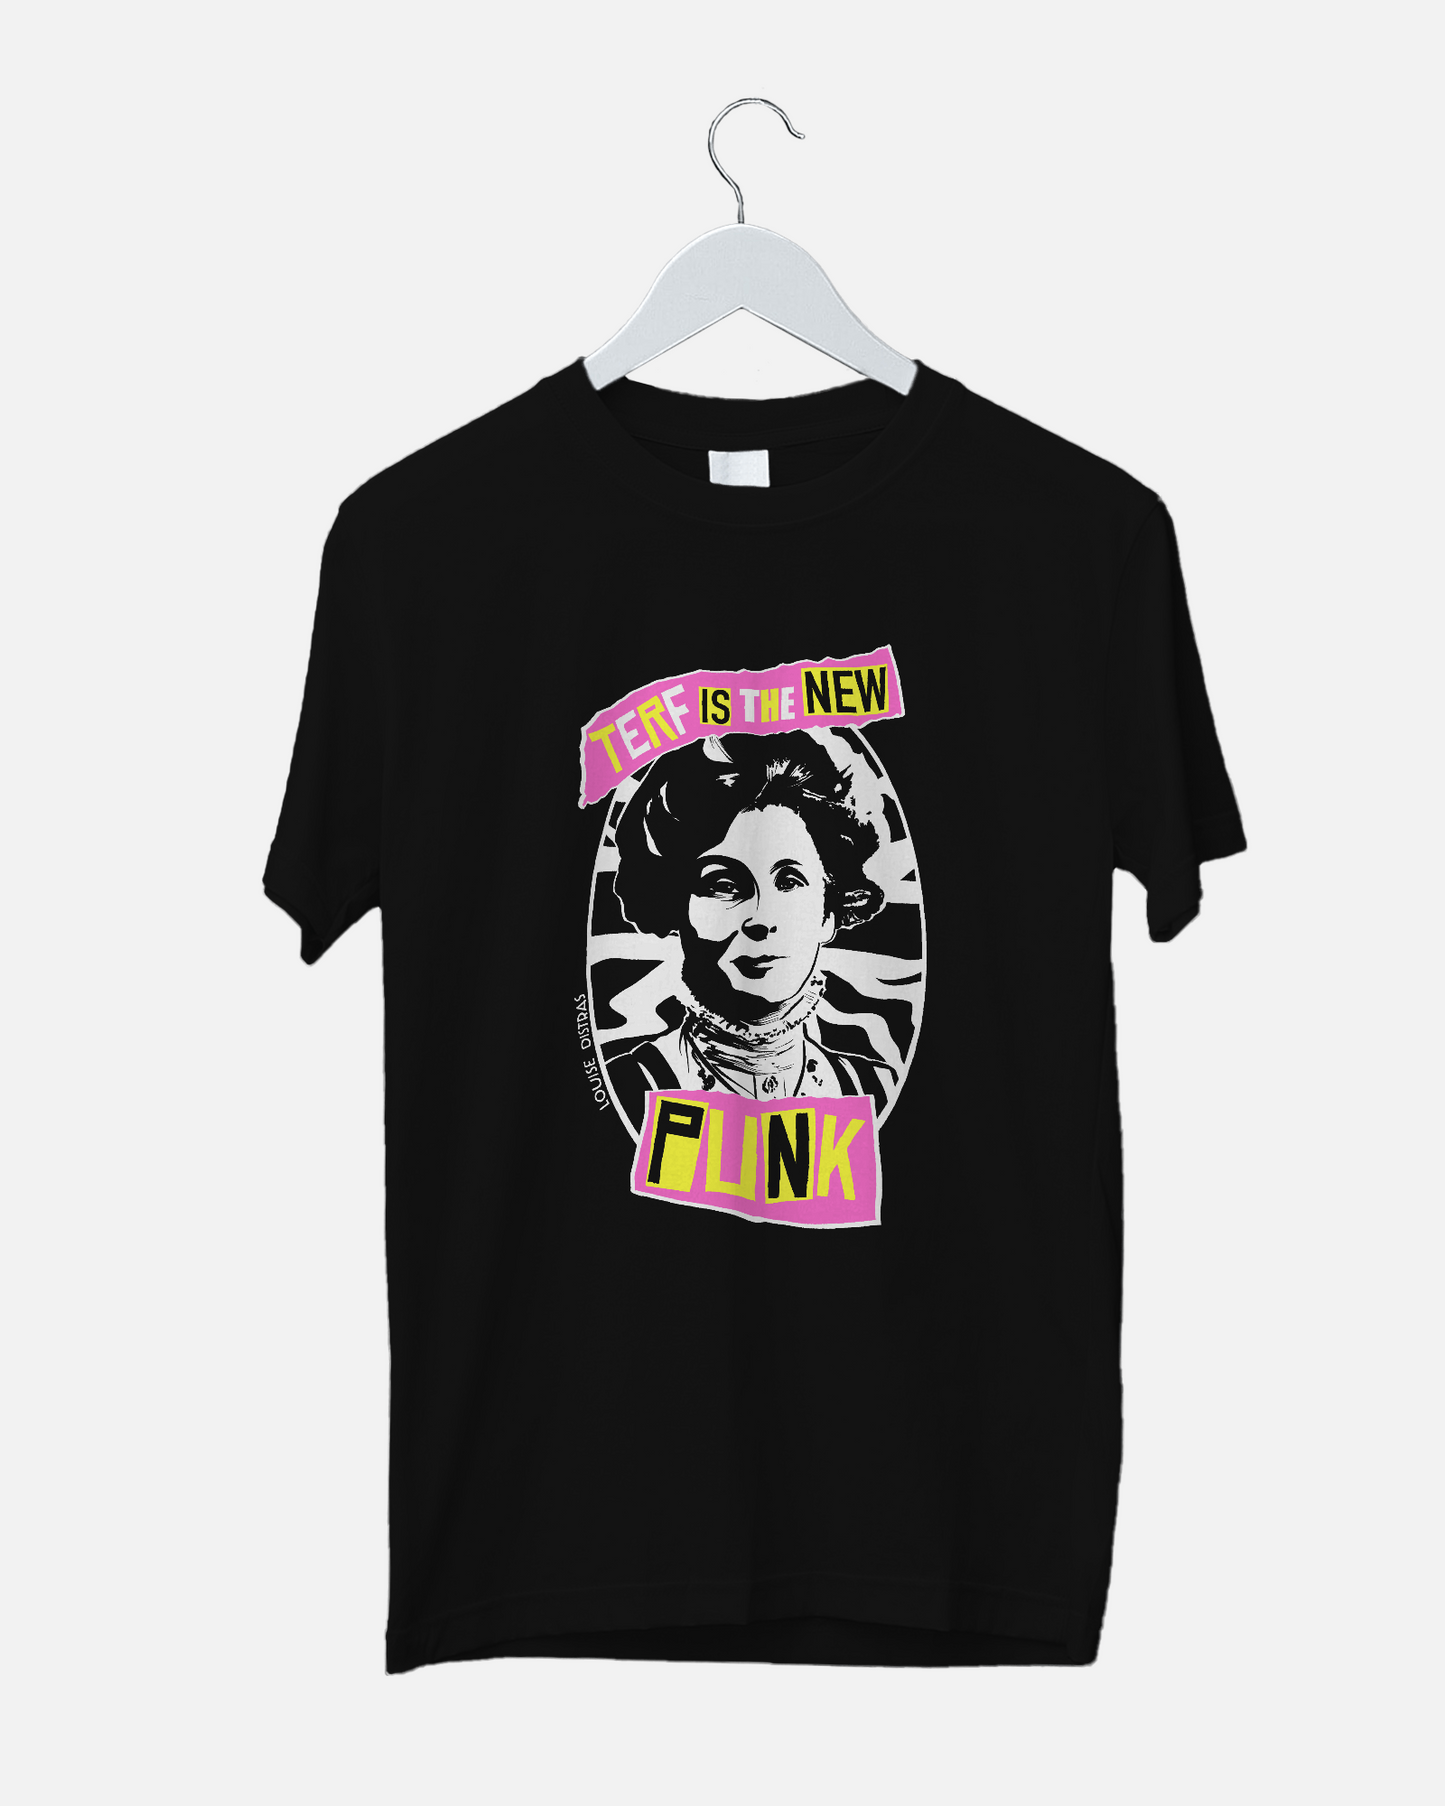 TERF is the New Punk T-Shirt